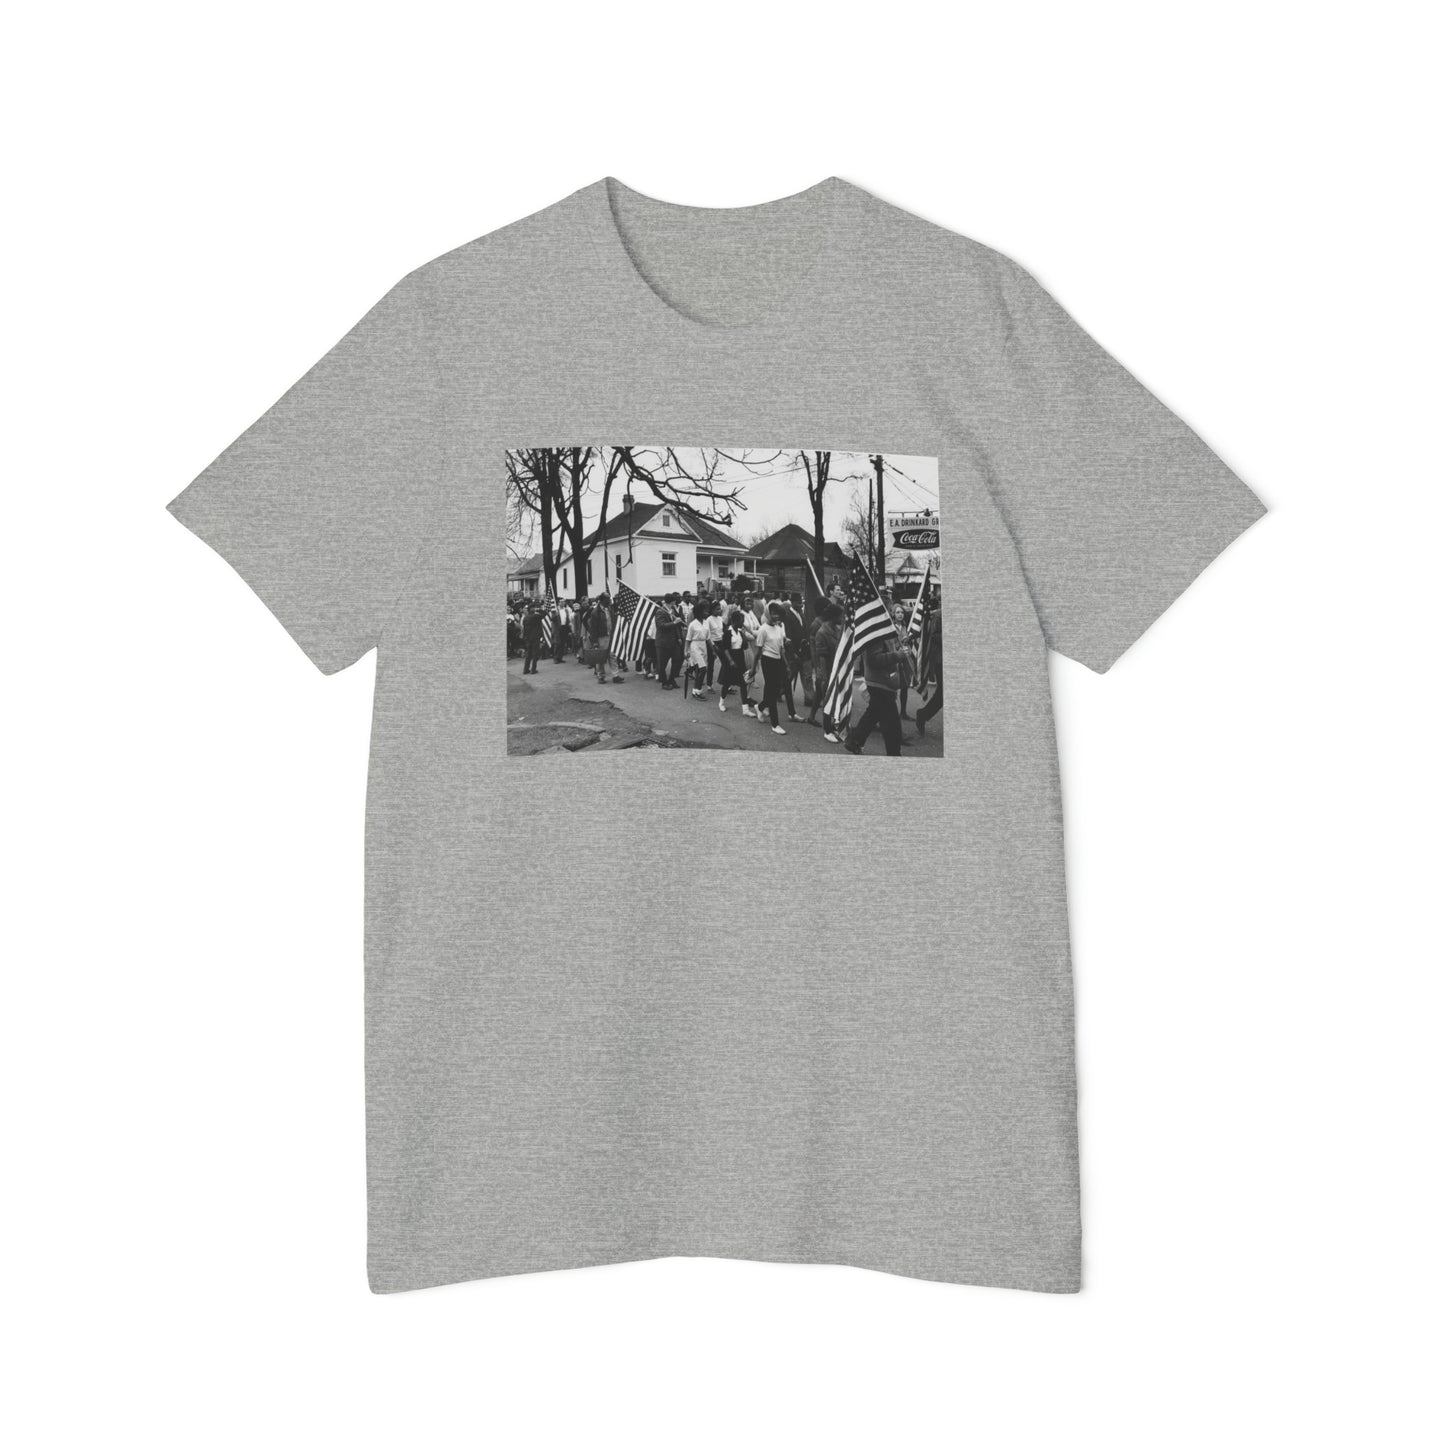 'Selma to Montgomery March' Photo T-Shirt (Pettus, 1965) | Made in USA